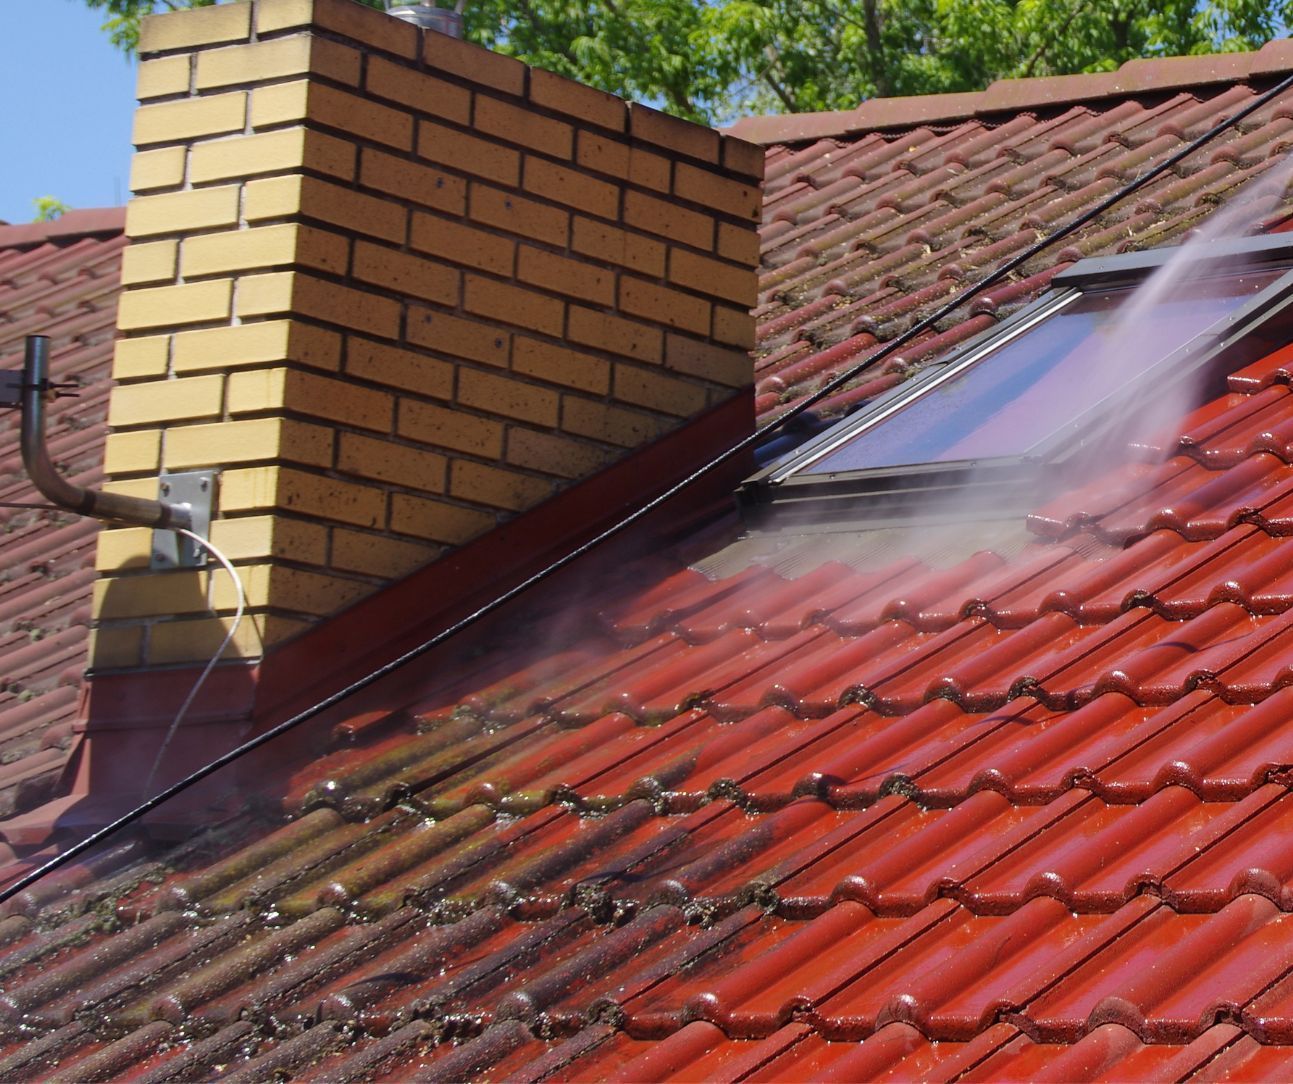 A roof is being cleaned with a high pressure washer